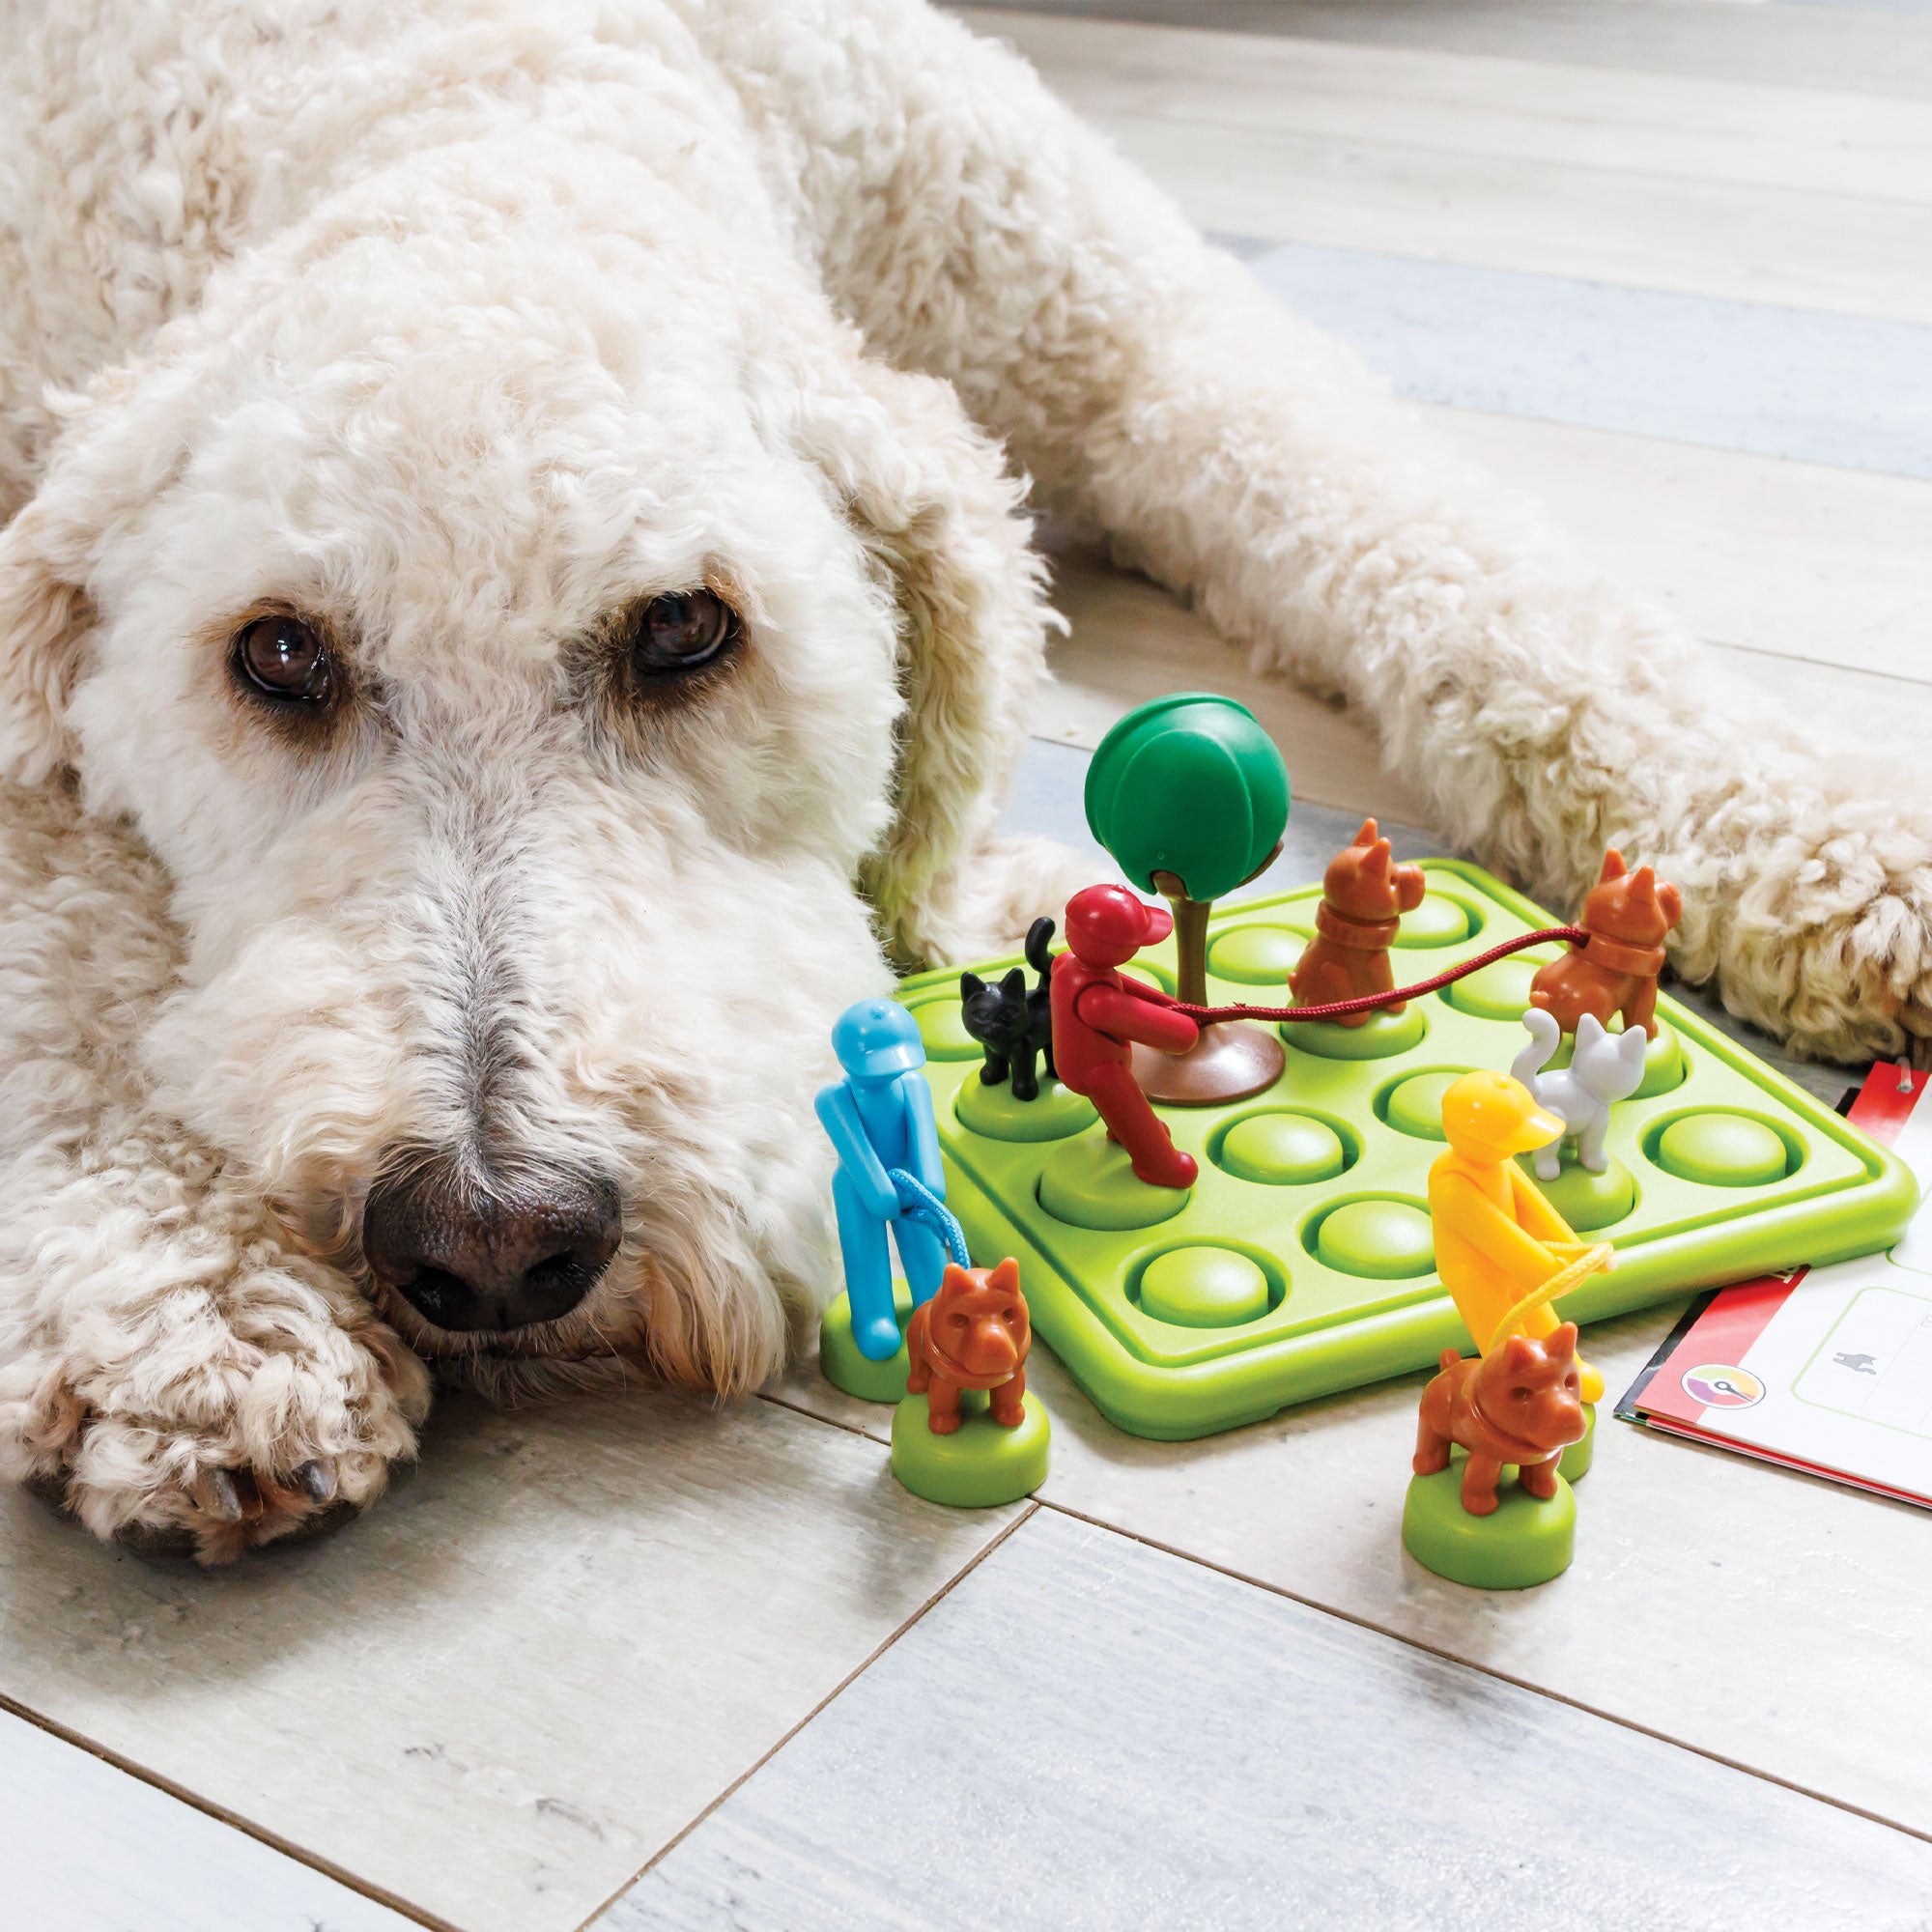 A cream-colored GoldenDoodle dog laying on the floor next to the Walk the Dog Smart Game. The square game board, on the right, is bright green with a grid of 4 by 4 circles that allow pieces to be placed on top. The pieces on top are colorful men with leashes attached to a dog, a cat, and a tree piece.